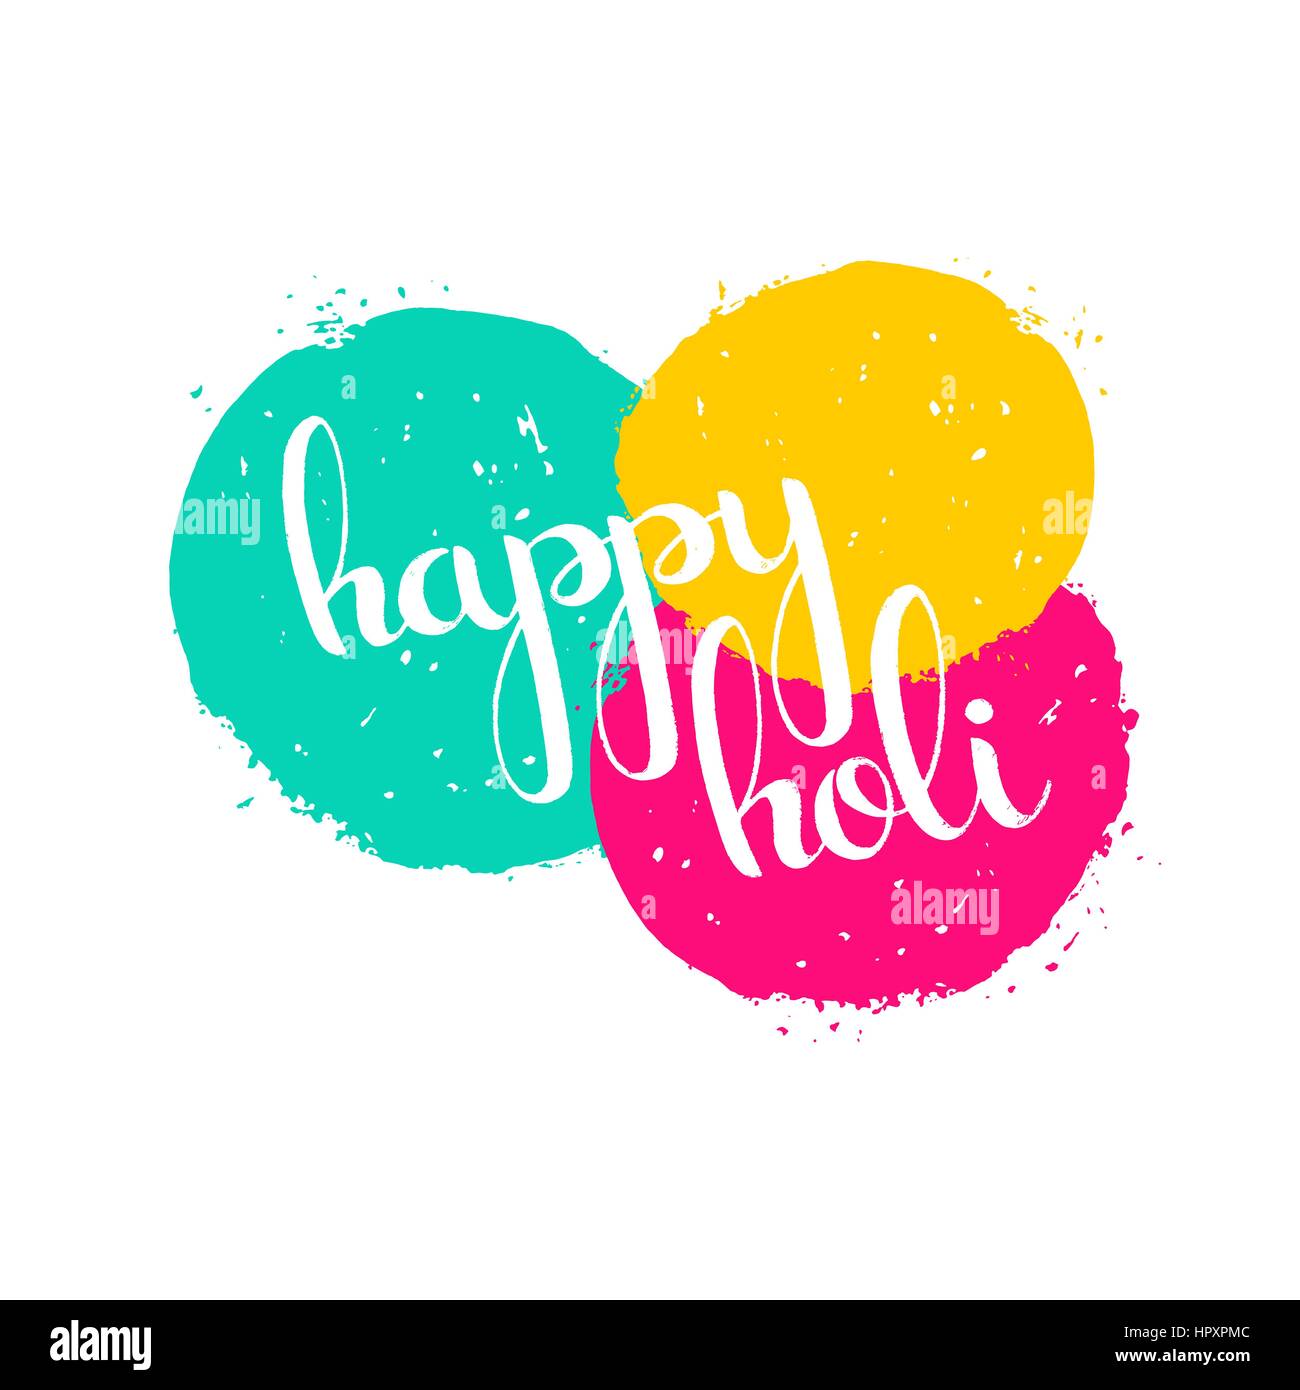 Happy Holi handwritten lettering with paint splashes. Spring festival of colors. Modern vector hand drawn calligraphy for your design Stock Vector